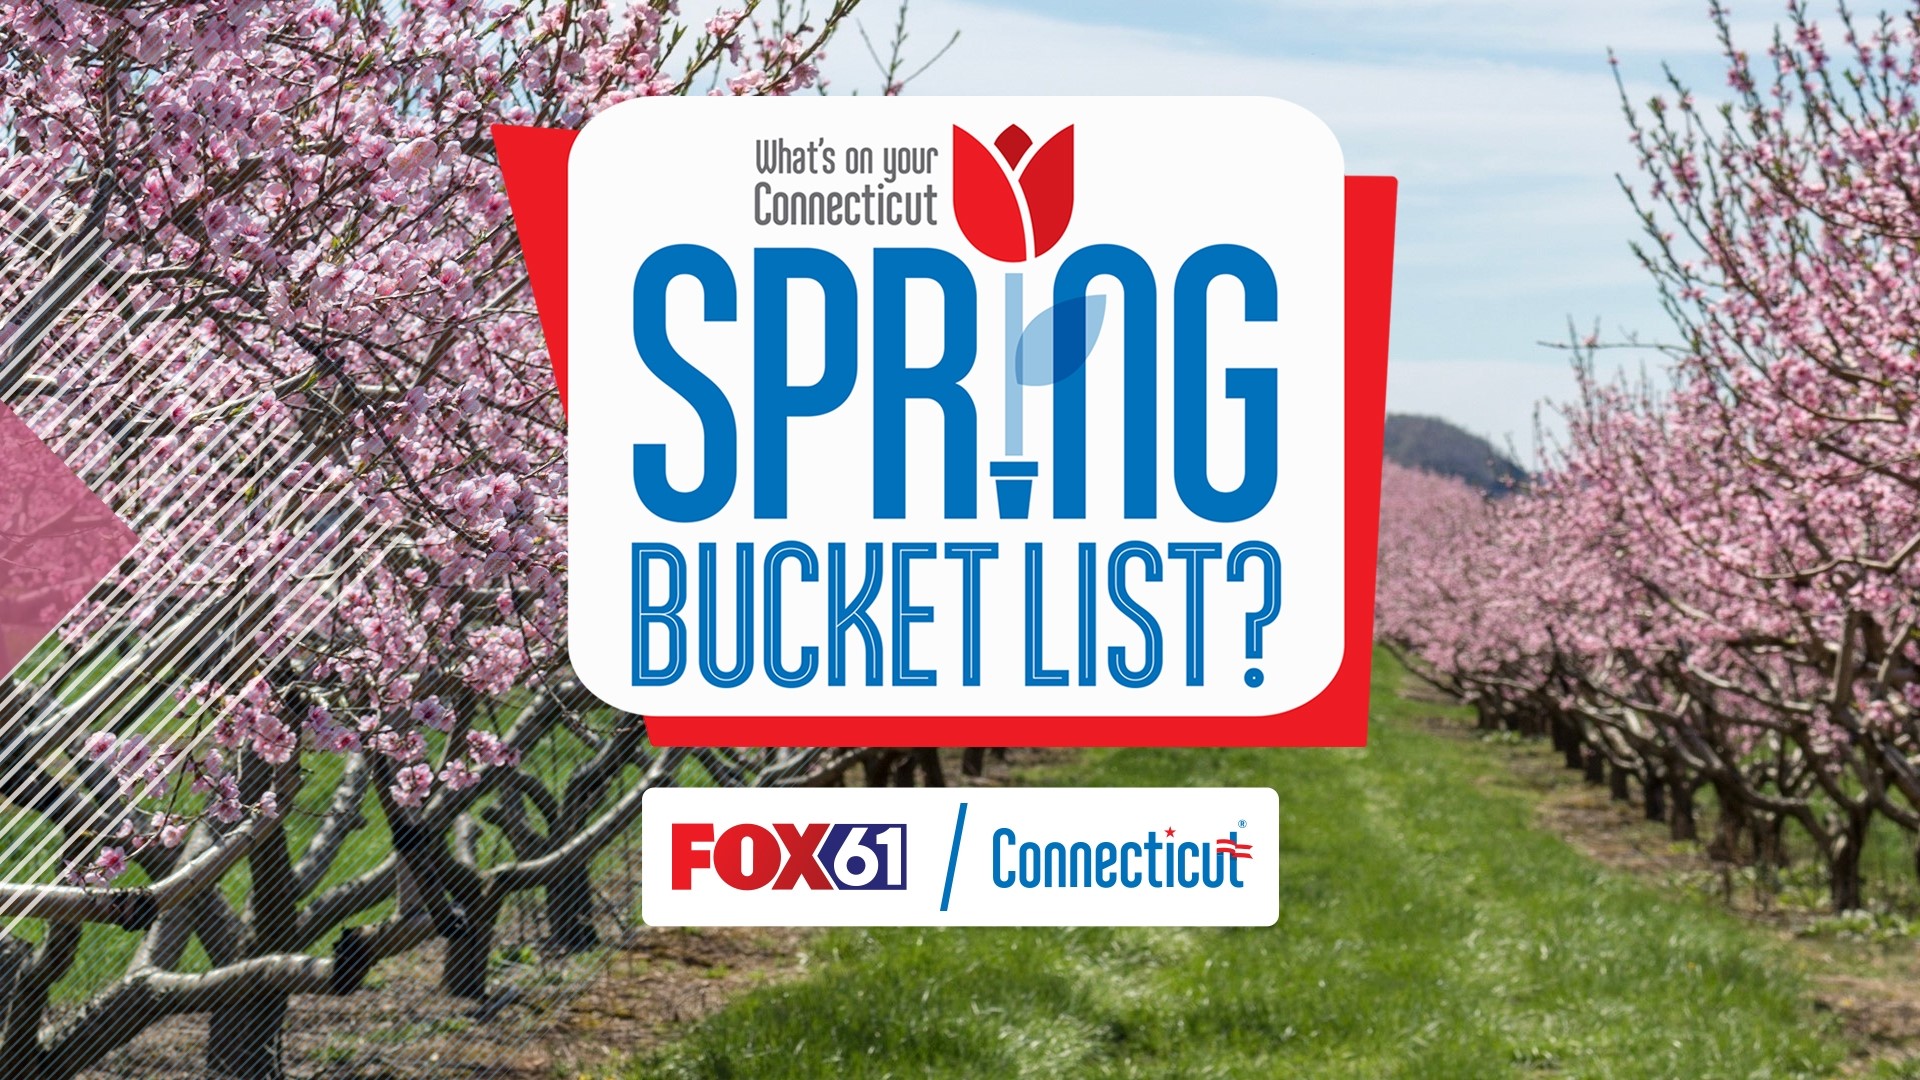 From tulips to rainforests to underwater adventures – FOX61's Keith McGilvery and Rachel Piscitelli check out family-friendly spring activities across Connecticut!